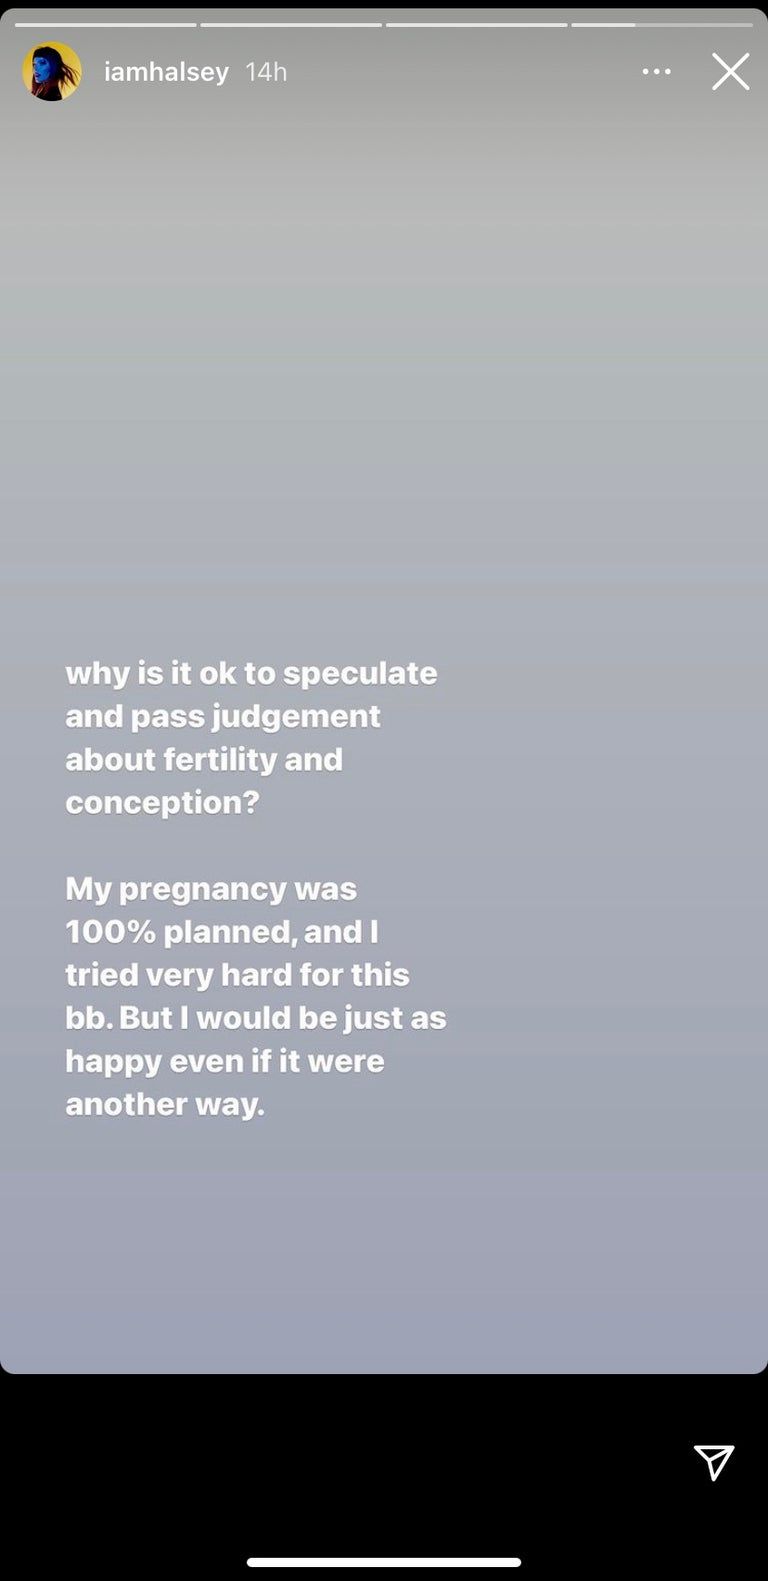 halsey instagram story about planned pregnancy